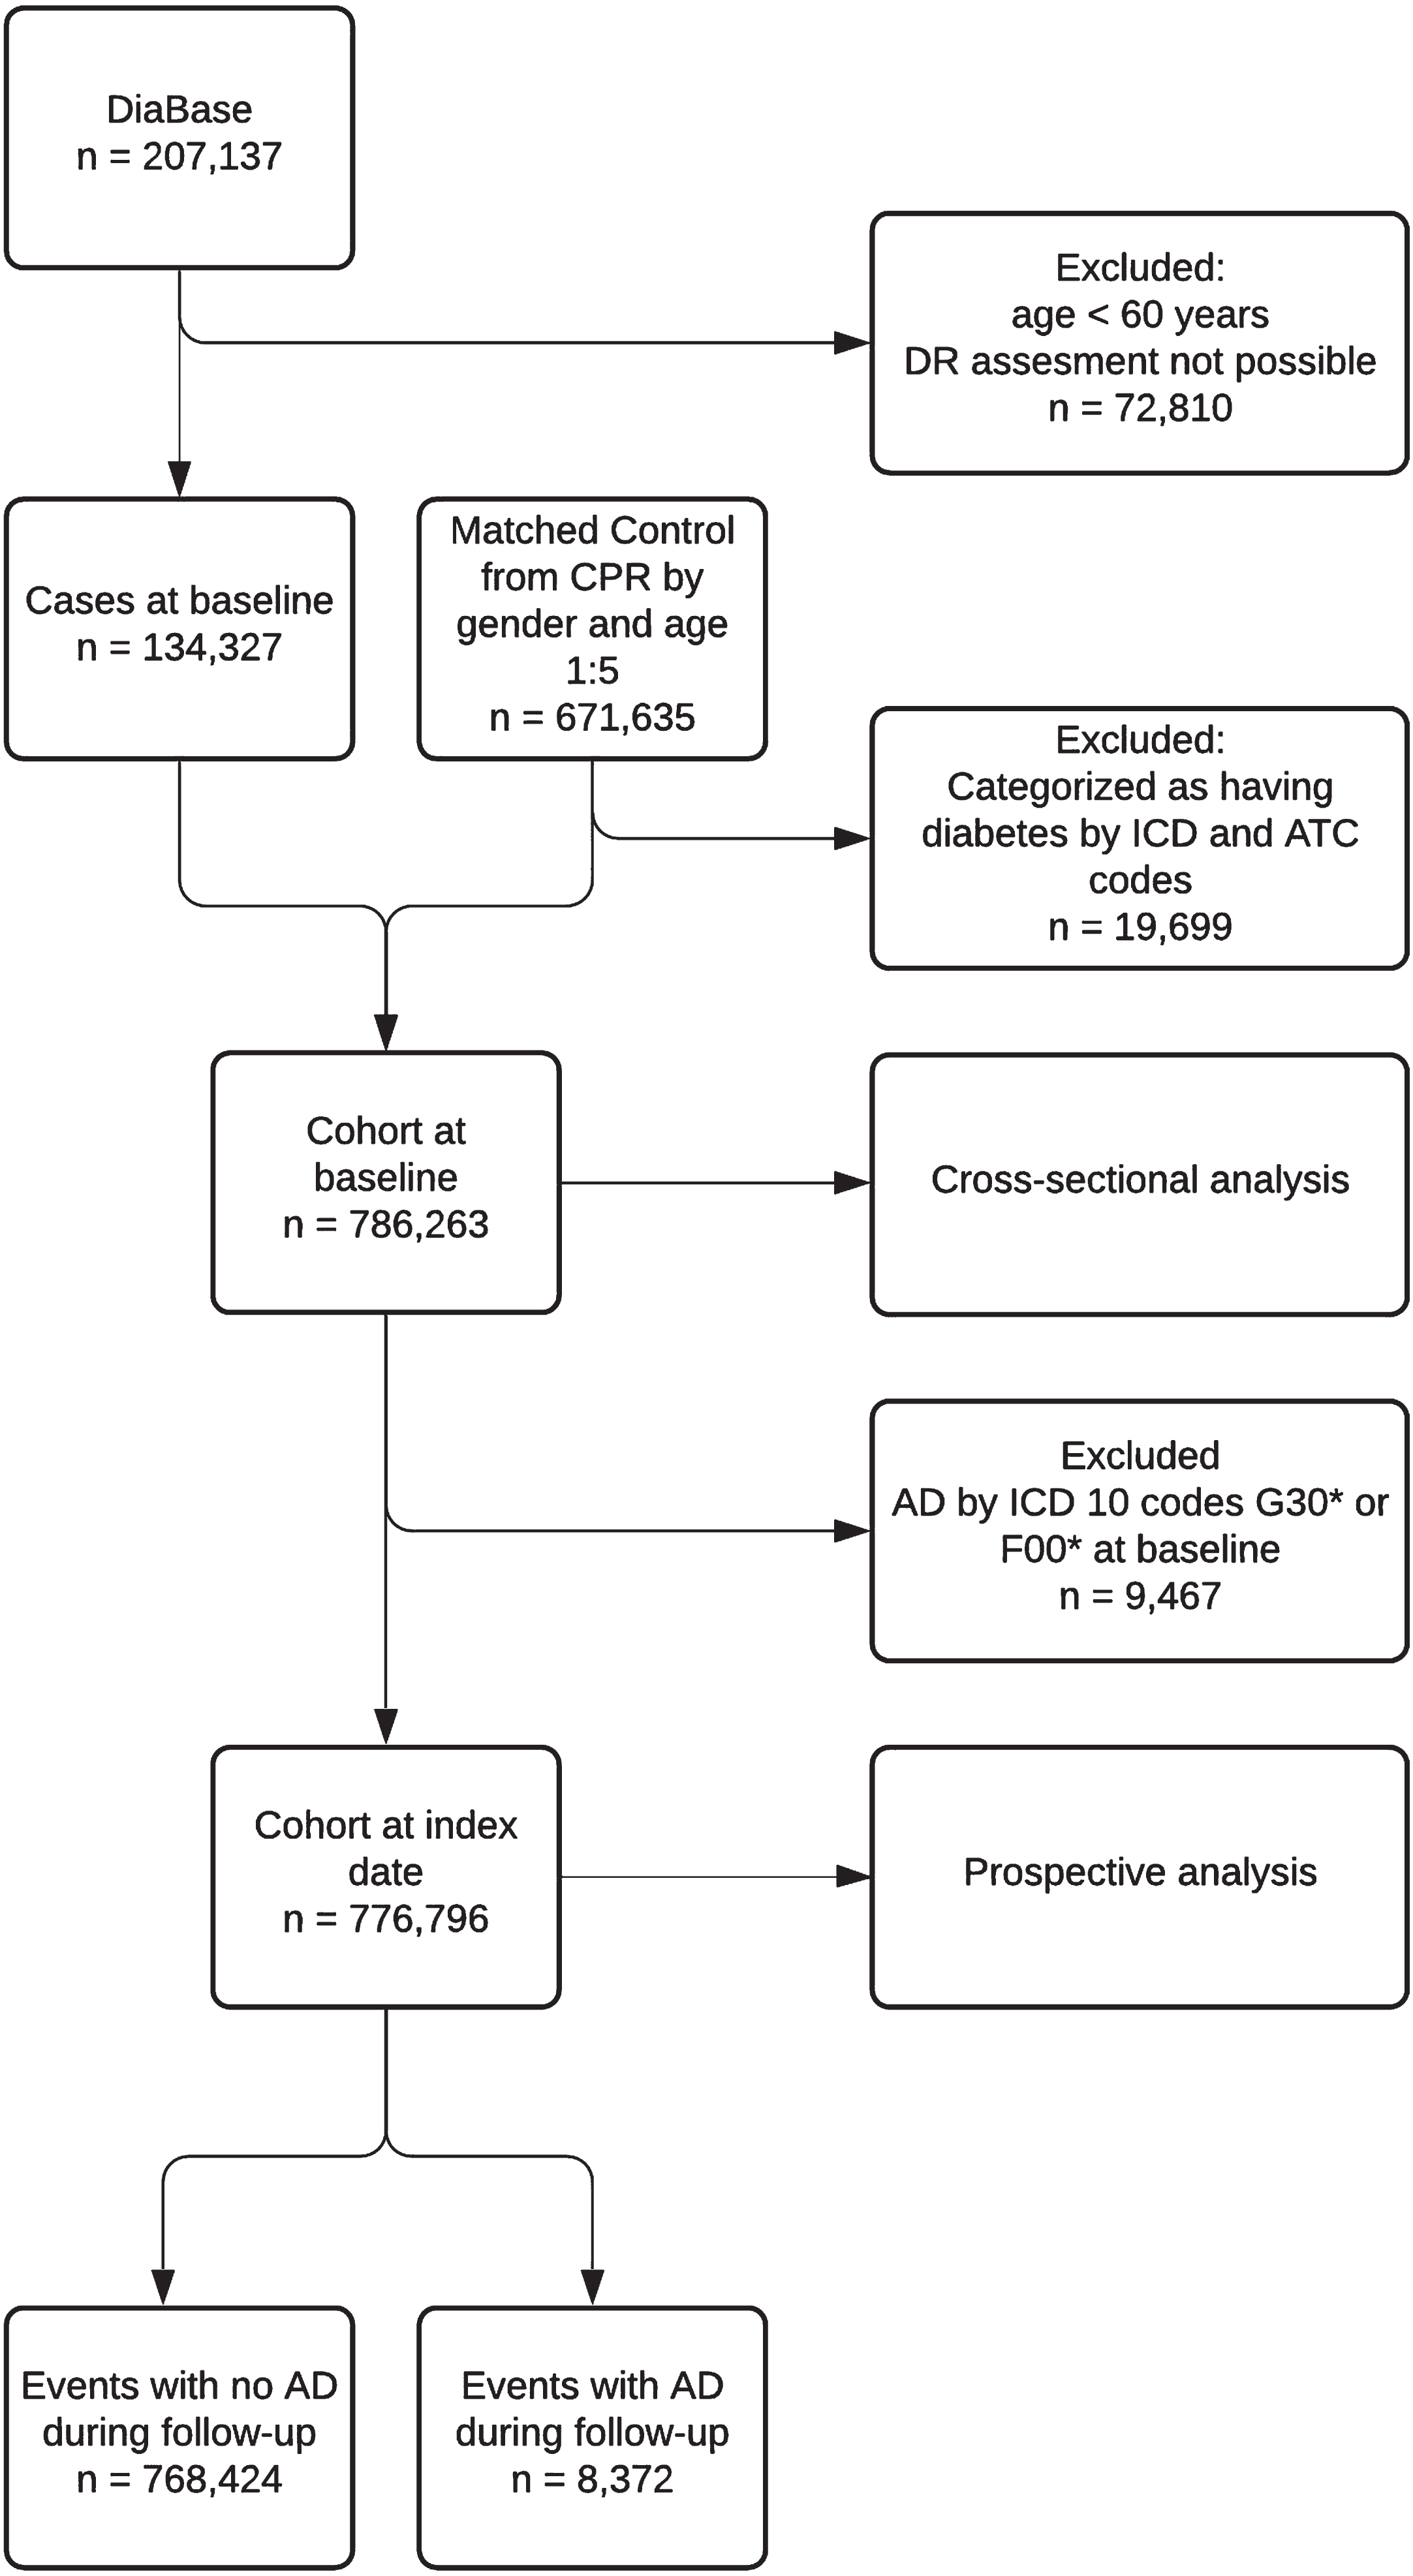 Flowchart showing population progression in the study. Diabase: Danish Registry of Diabetic Retinopathy. DR, diabetic retinopathy; AD, Alzheimer’s disease; CPR, The Danish Civil Registration System; ICD, International Classification of Disease; ATC, Anatomical Therapeutic Chemical Classification System.